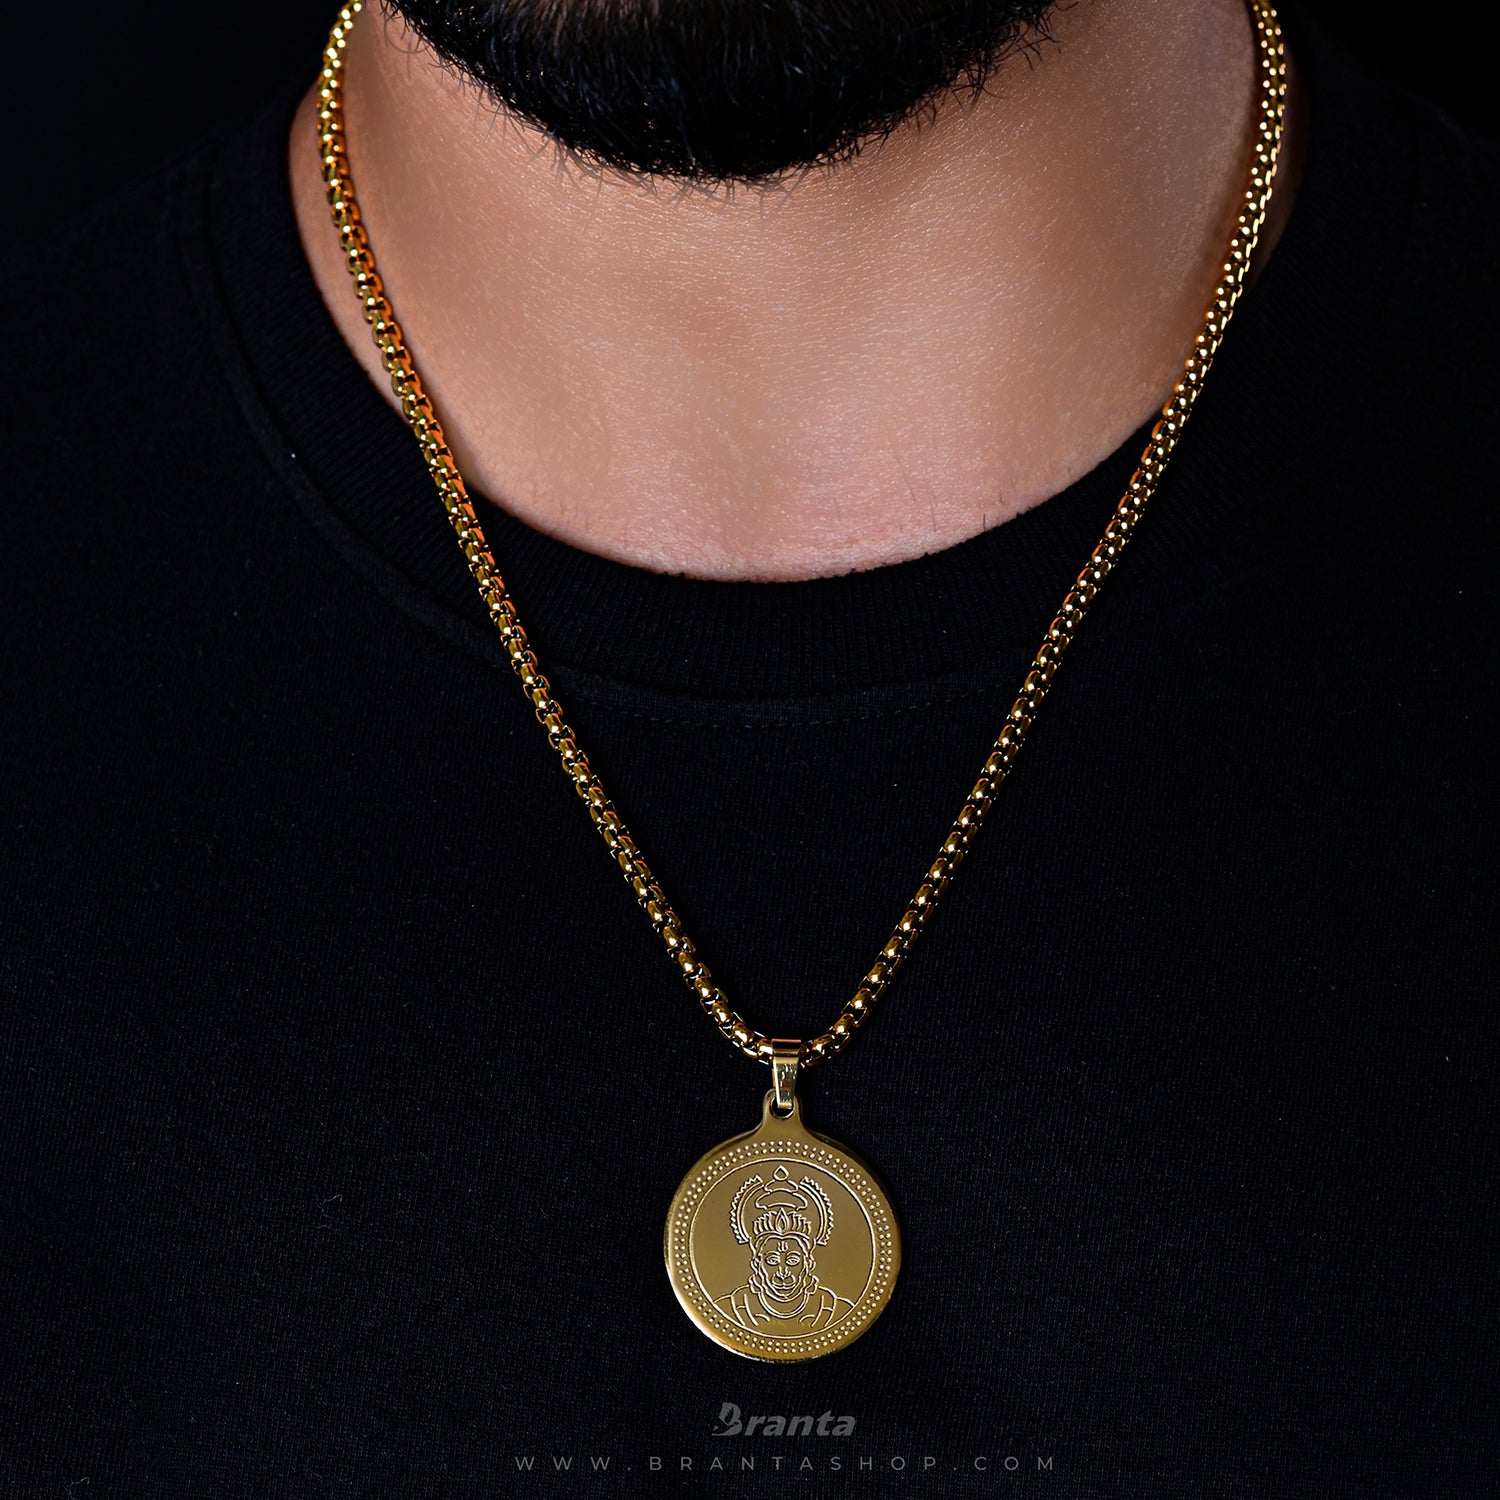 Gold Cross Necklaces For Men. The Ultimate Guide on How to Wear Them -  Proclamation